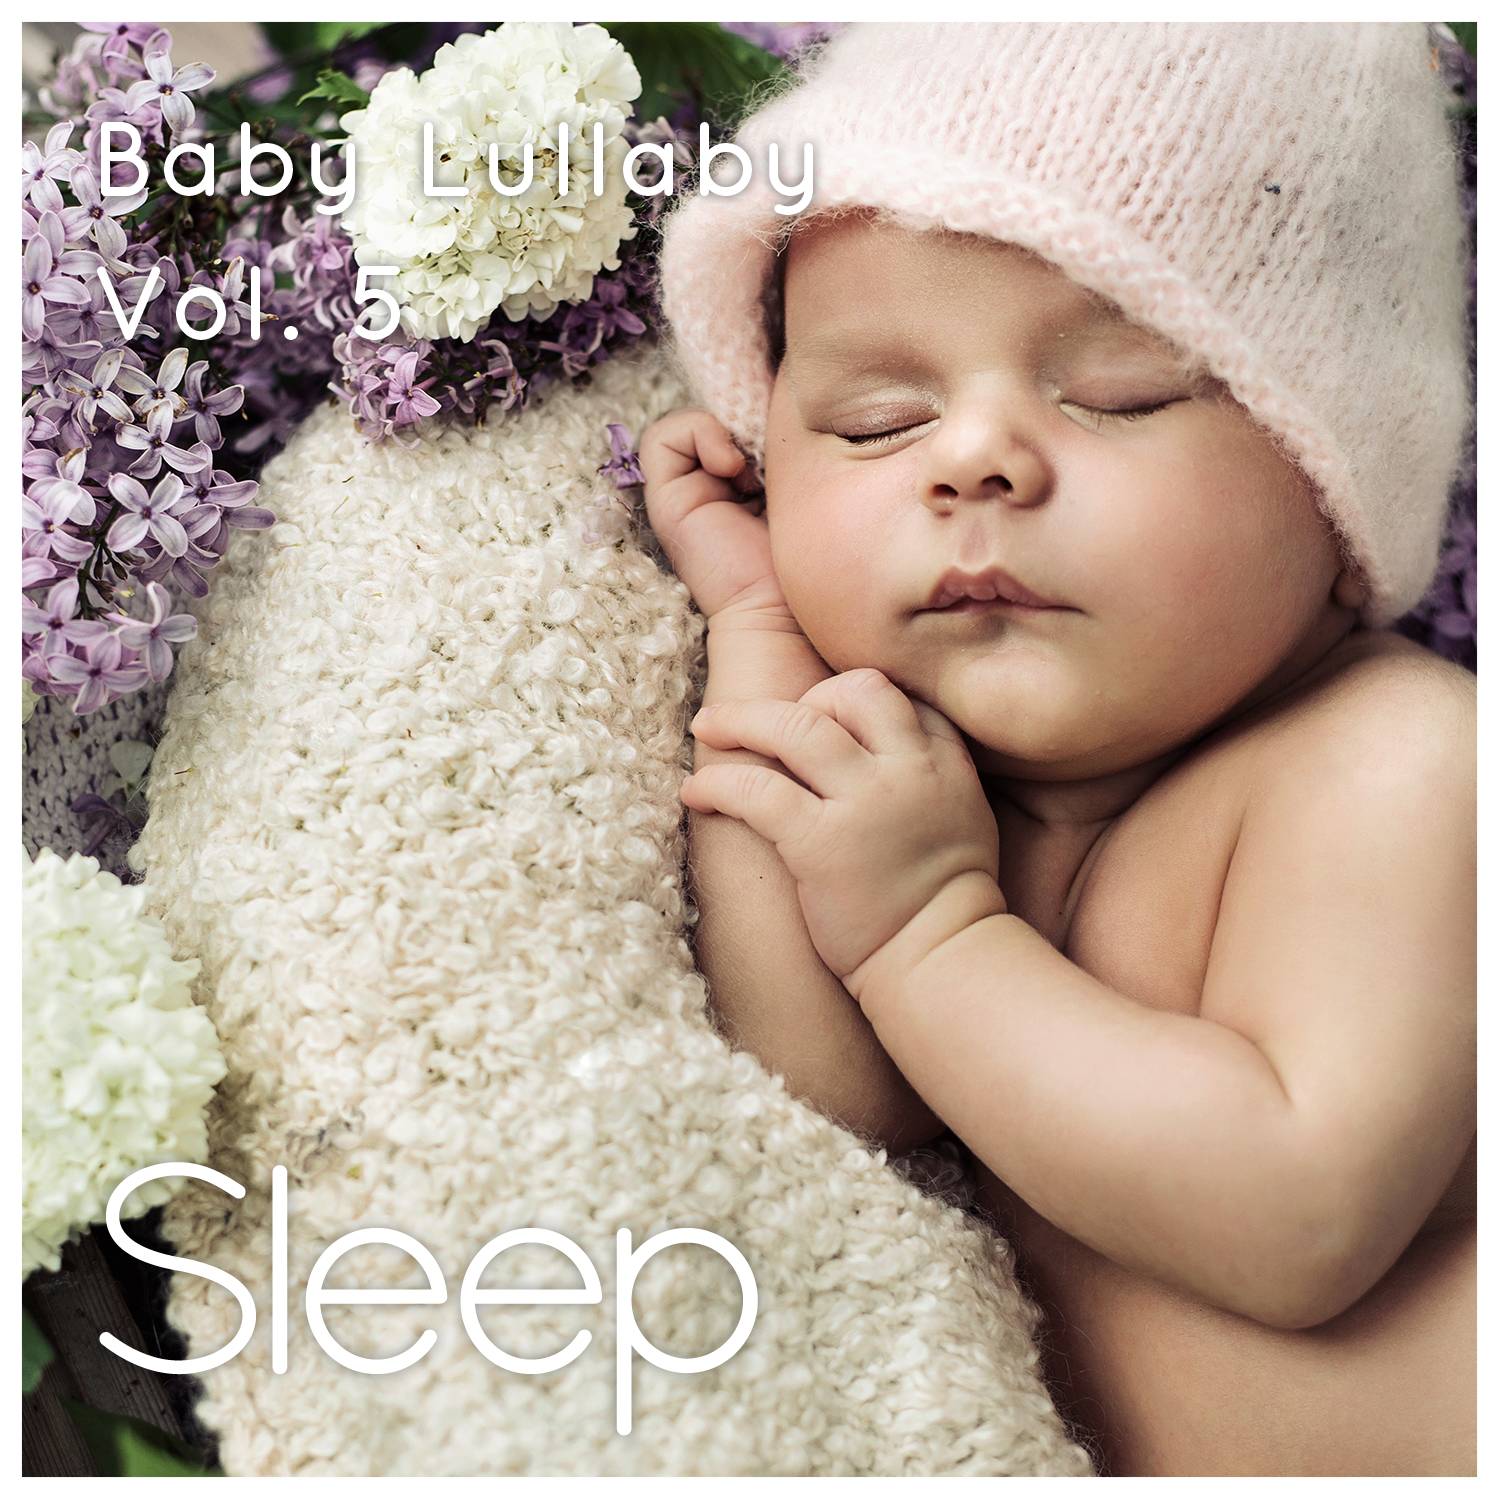 Baby Sleep Ambient Lullaby, Pt. 25